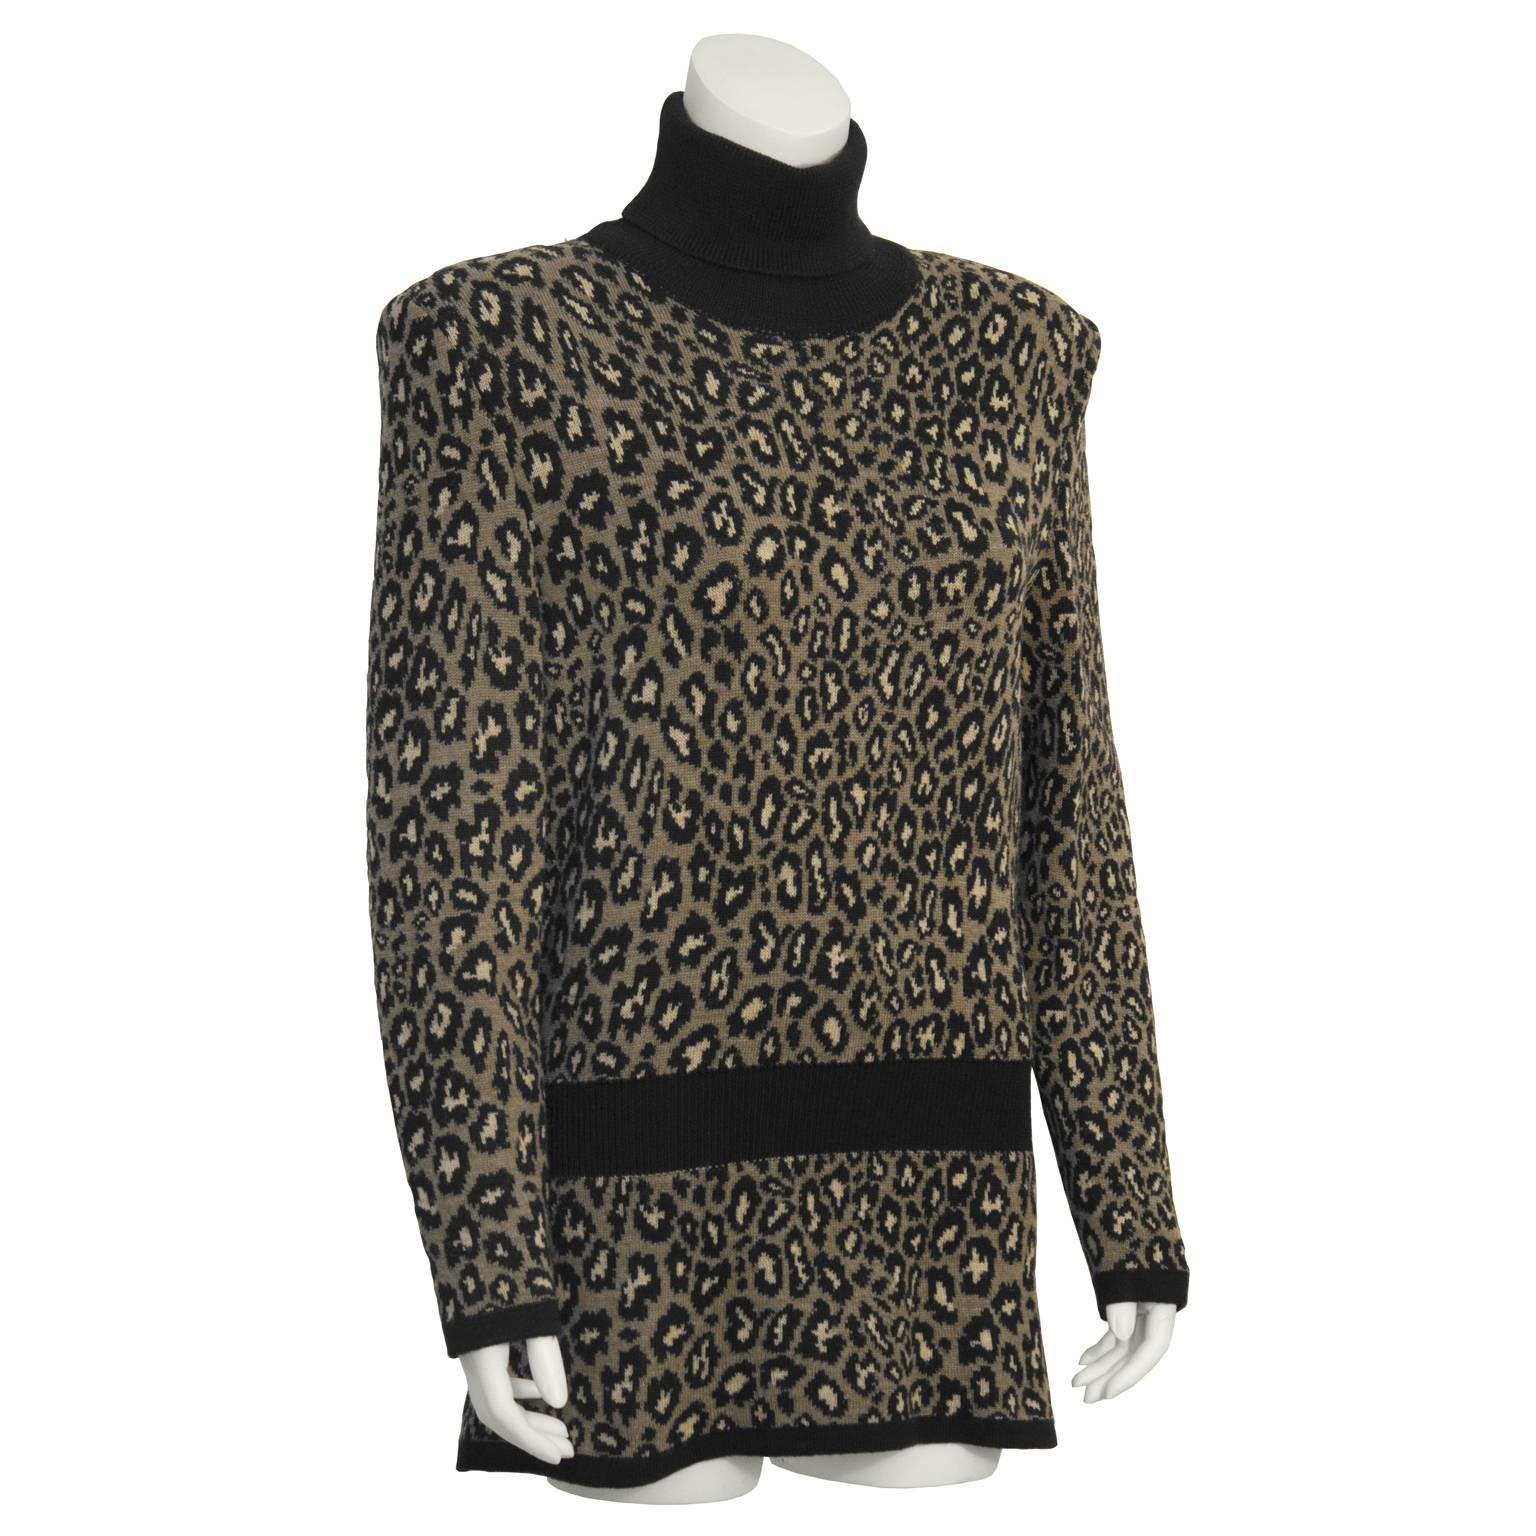 Valentino leopard knit turtleneck sweater from the 1980's features padded shoulders, black ribbed waist band, and black ribbed trim. Leopard print features notes of taupe, black and beige. Excellent vintage condition. Fits like a US 6.

Length 32